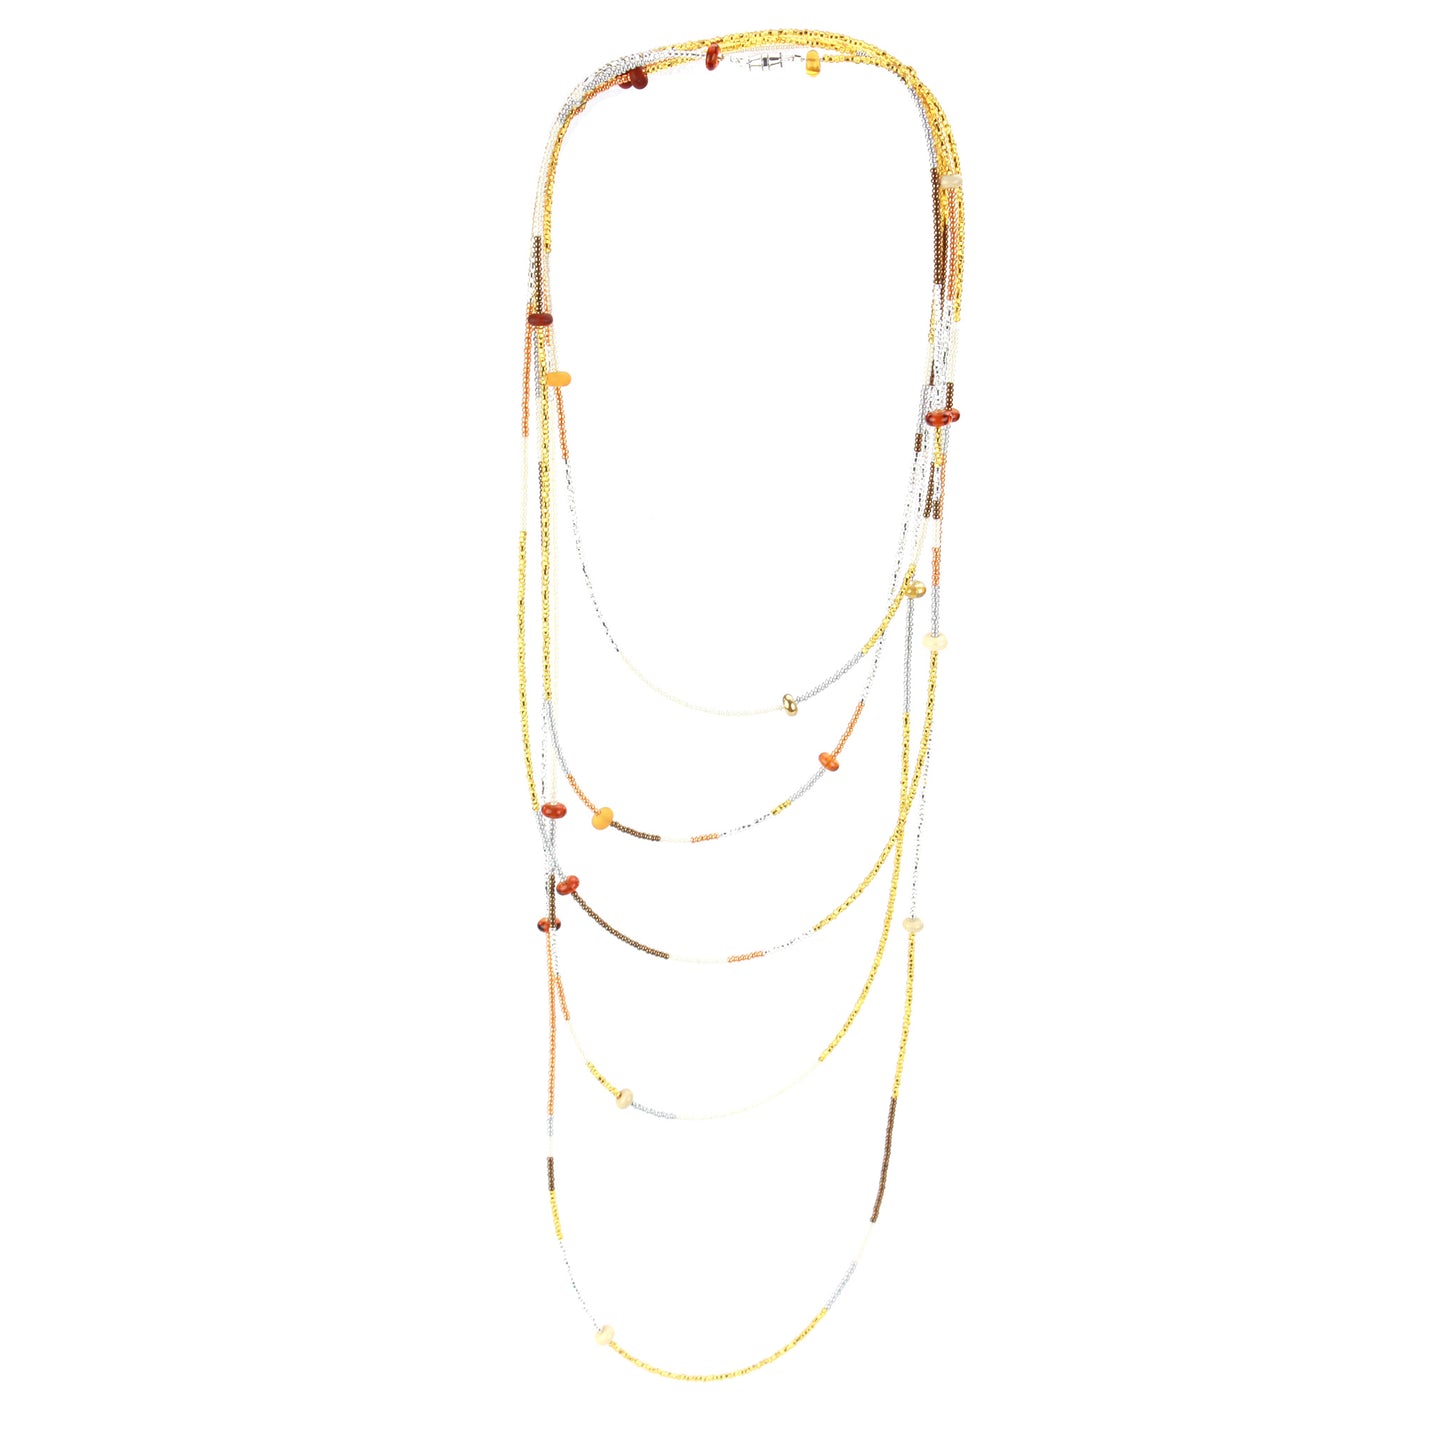 12 foot necklace -Amber, ivory and gold